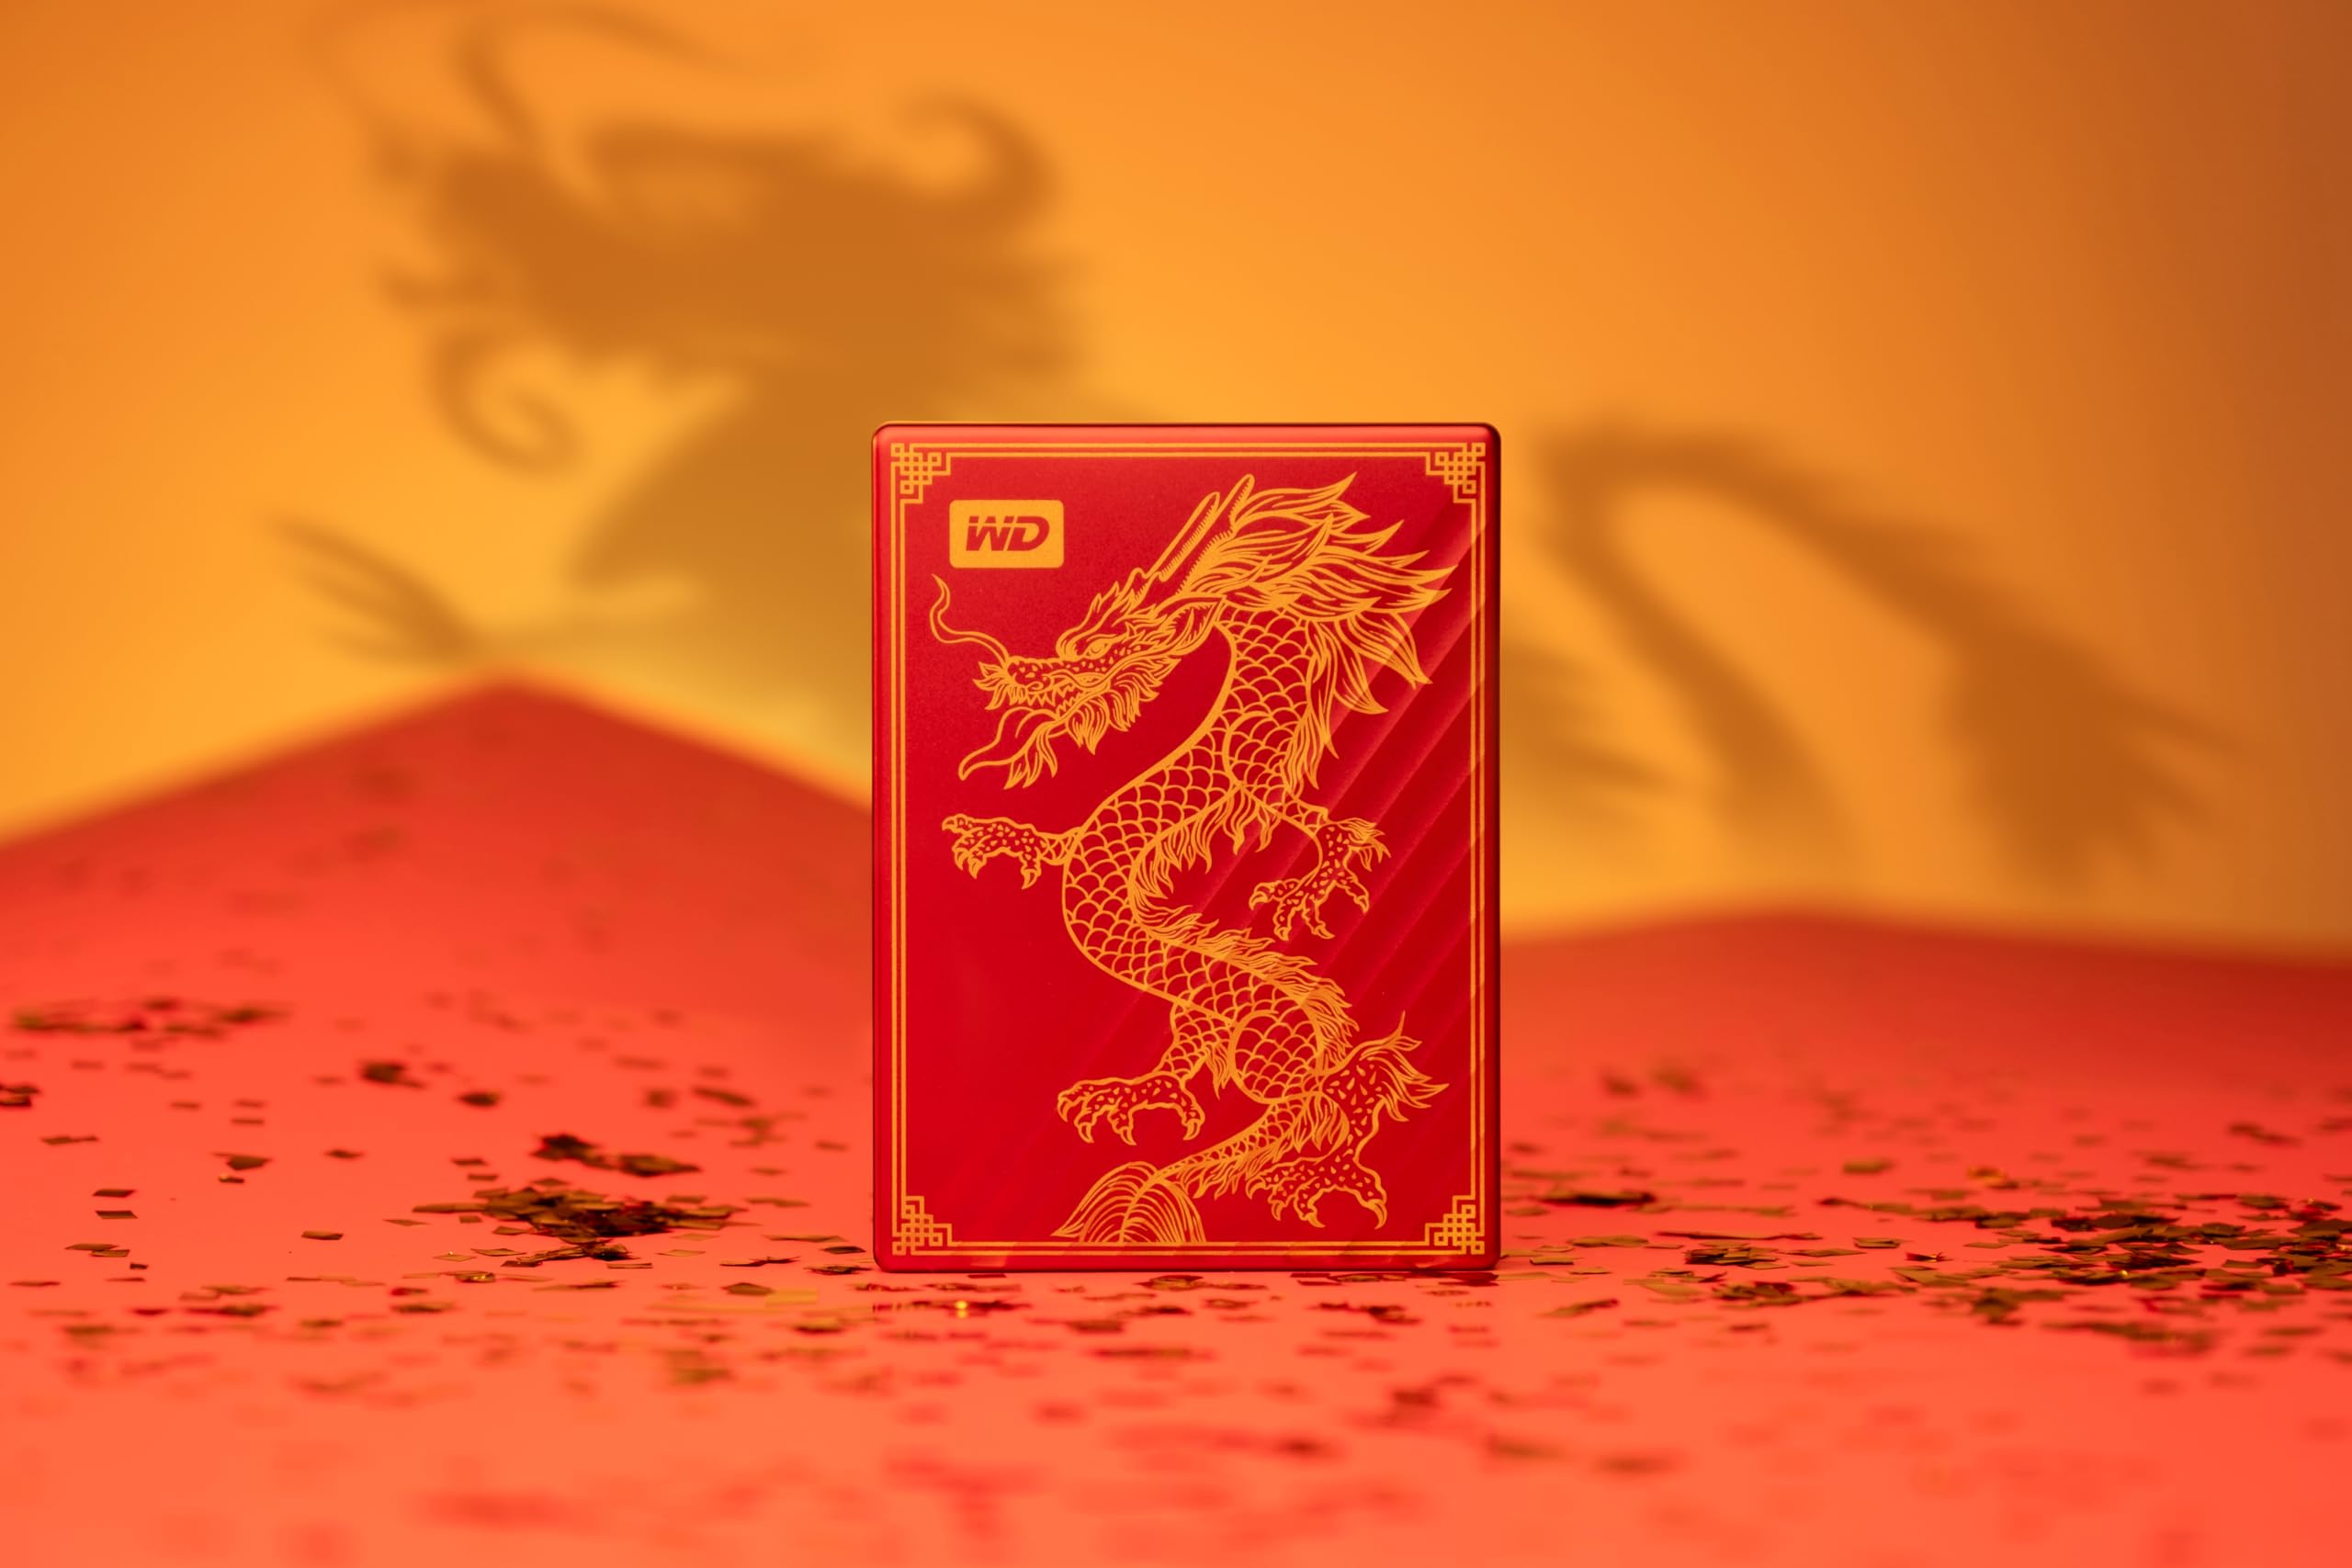 WD 2TB My Passport Ultra Portable Hard Drive, Limited Edition Red Dragon Drive, USB-C, with Backup Software and Password Protection - WDBRHB0020BRD-WESN